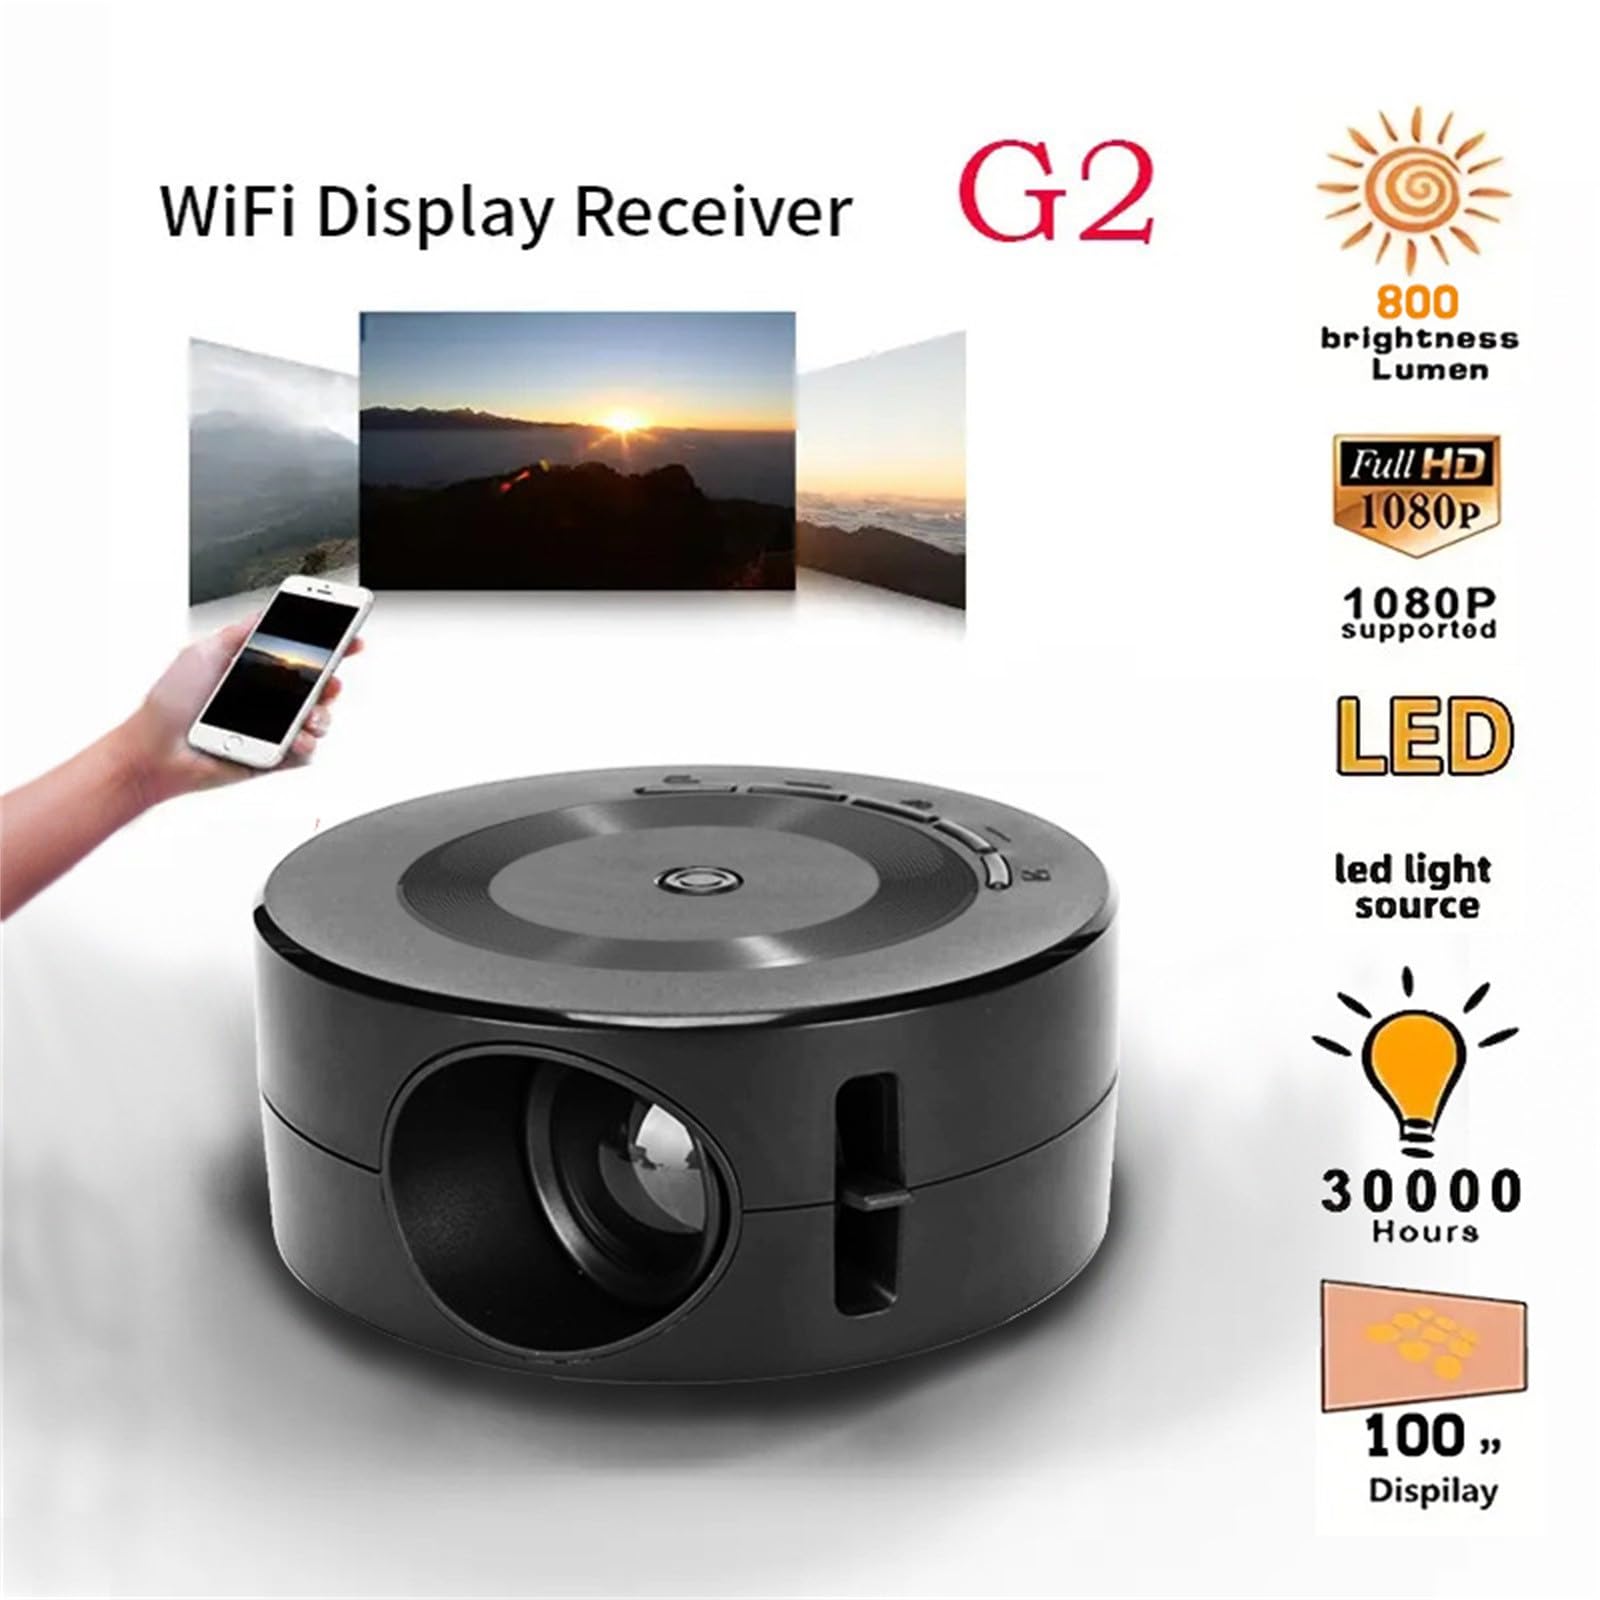 Mini Video Projector, 1080P Portable Projector Compatible with USB|Android Phone, Tech Gadgets, Outdoor Projector, Mini TV for Home /Camping/Travel/Party, Cool Stuff, Personalized Birthday Gifts